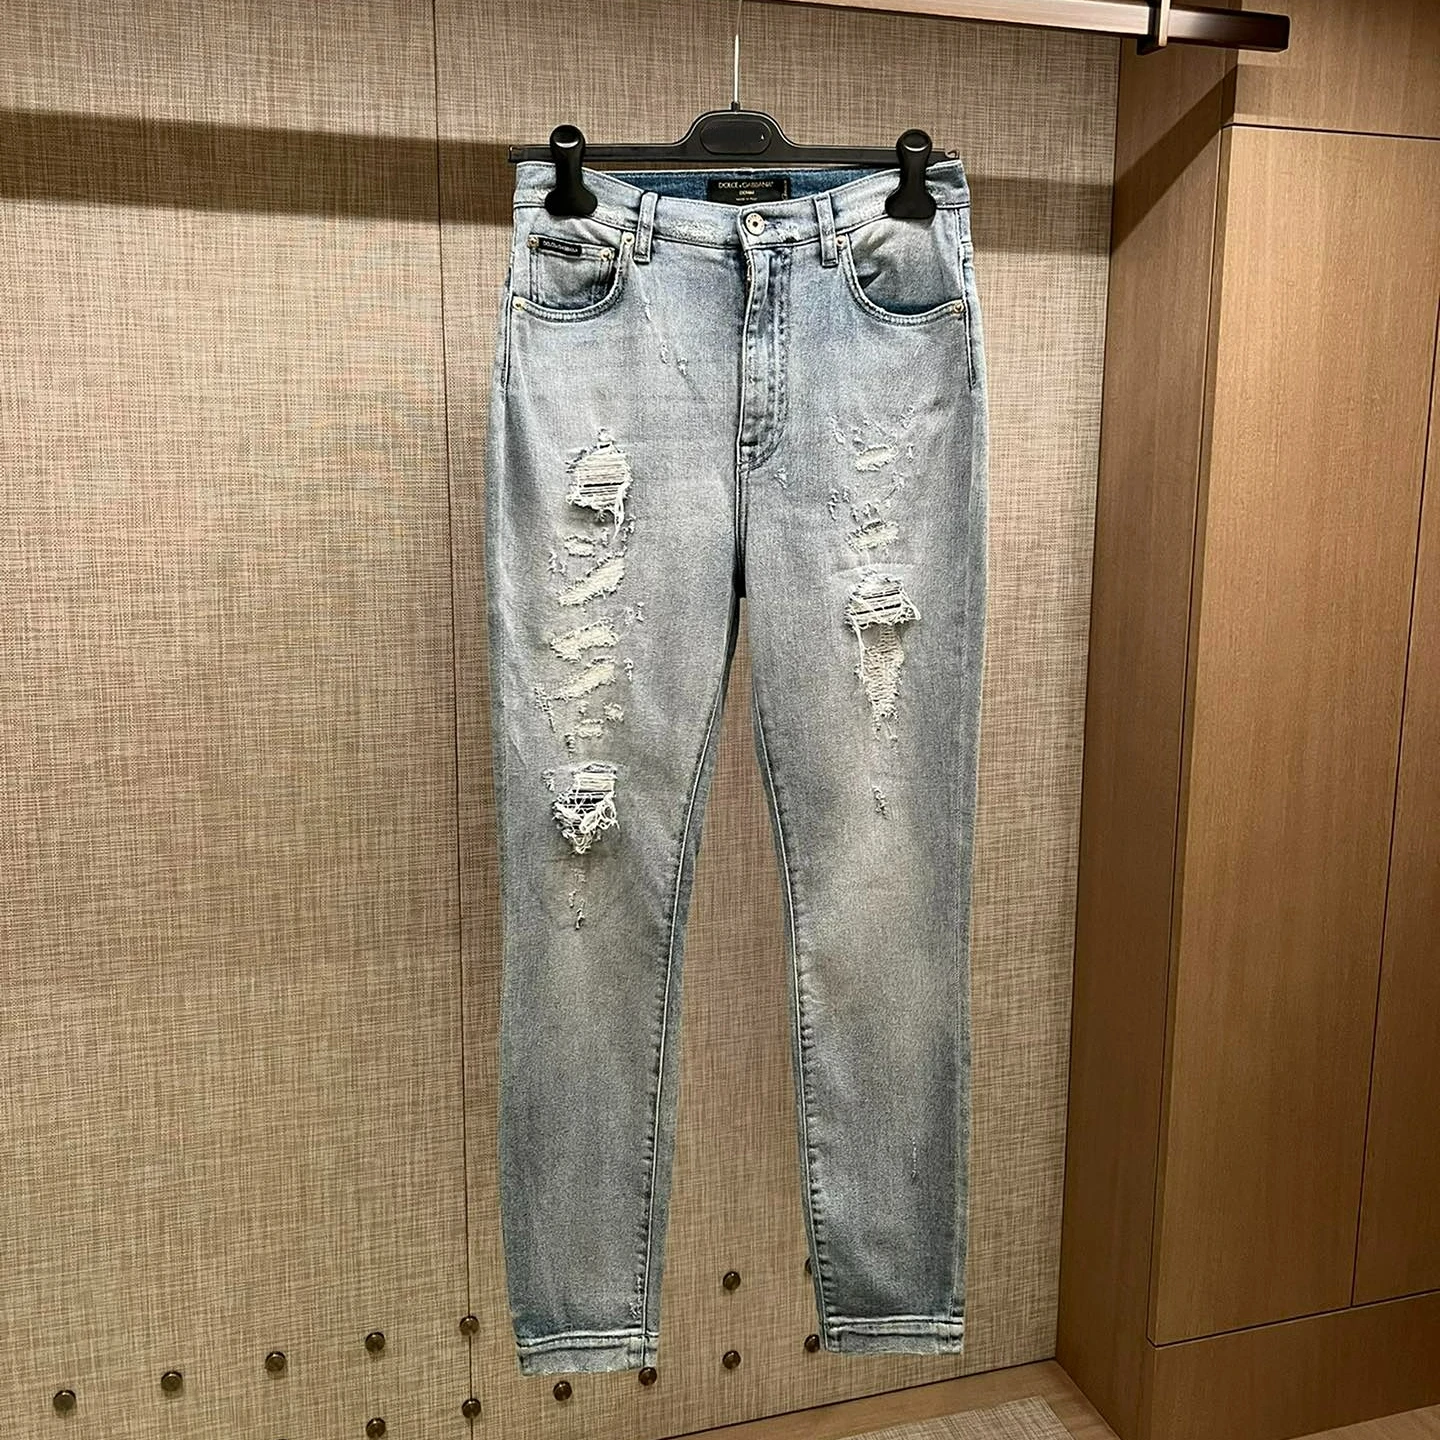 

2022 New Summer Women Pants D Style Luxury High Waisted Pants Lmitation Denim Scratched Distressed Run Away